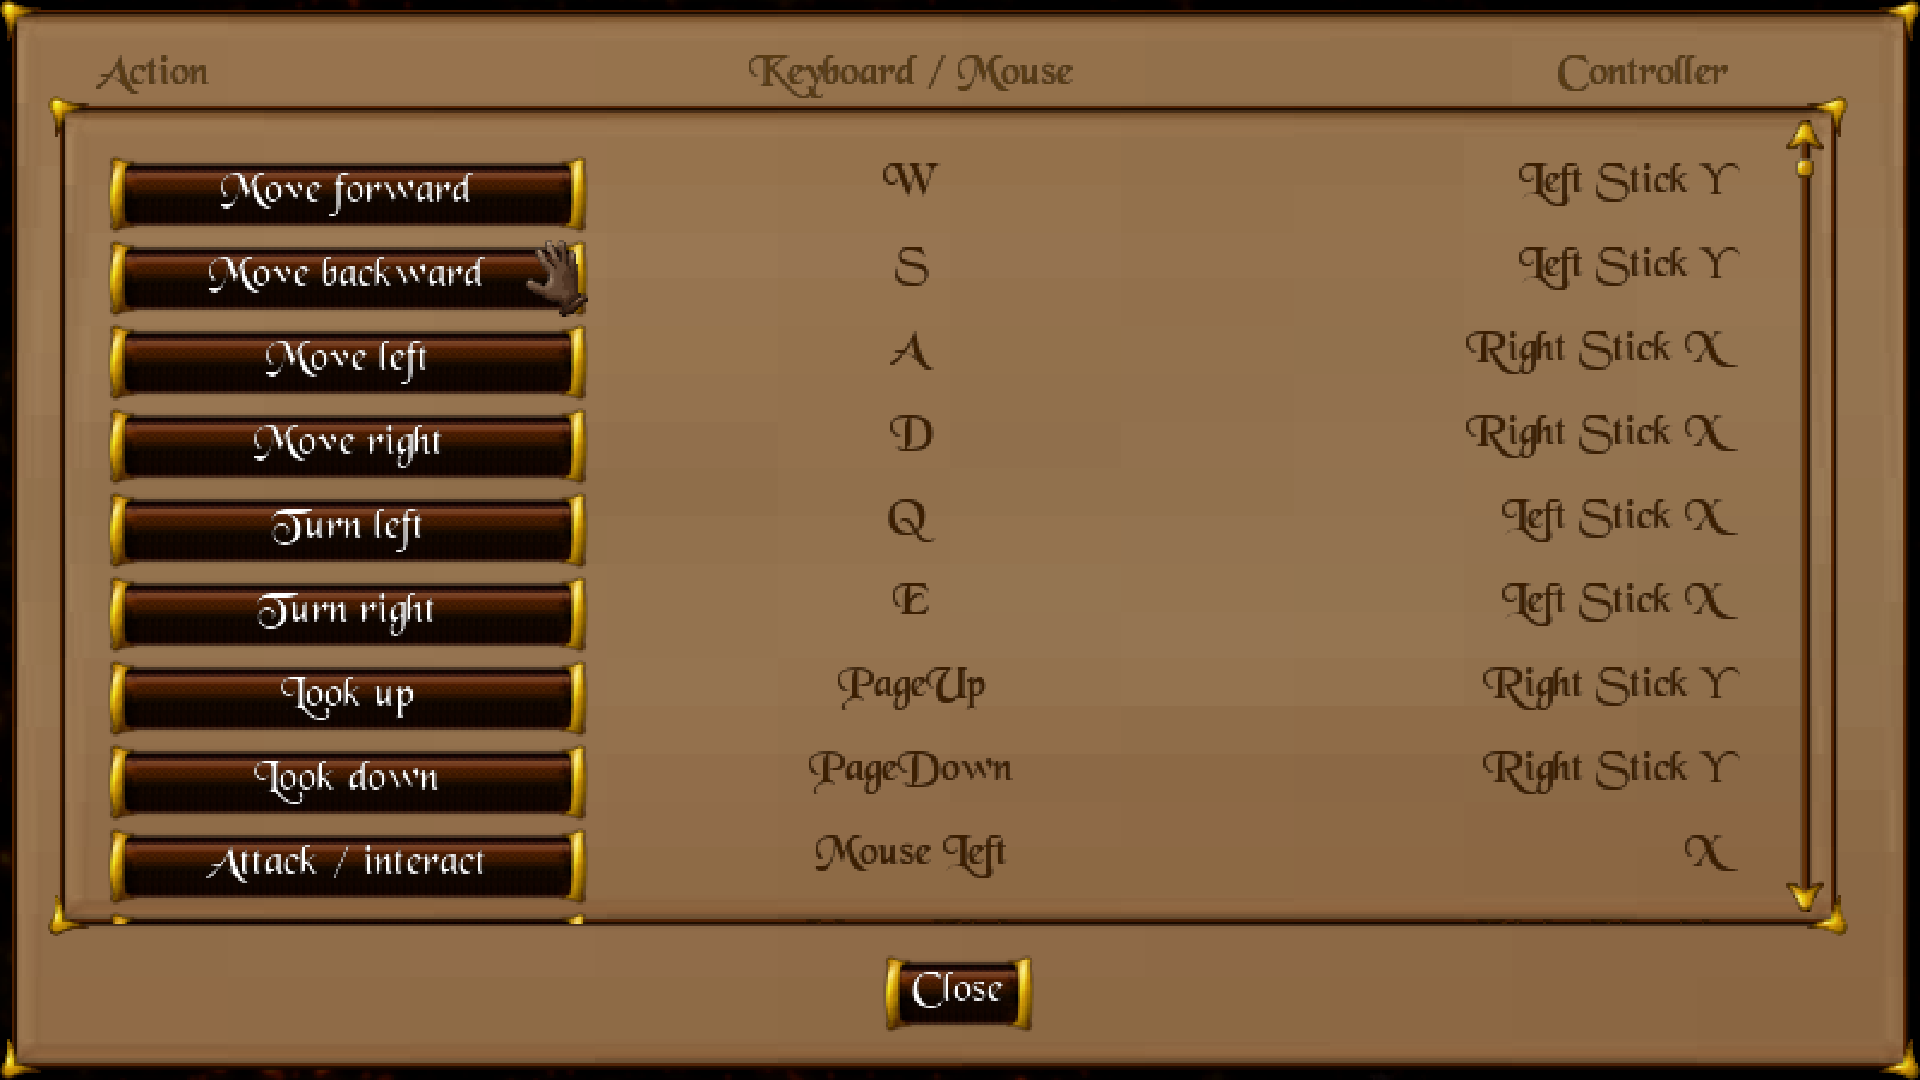 The new controls menu of the game which allows the player to map keys and controller buttons to actions. There is a parchment-colored background and brown buttons with a hand that acts as a cursor for the controller.